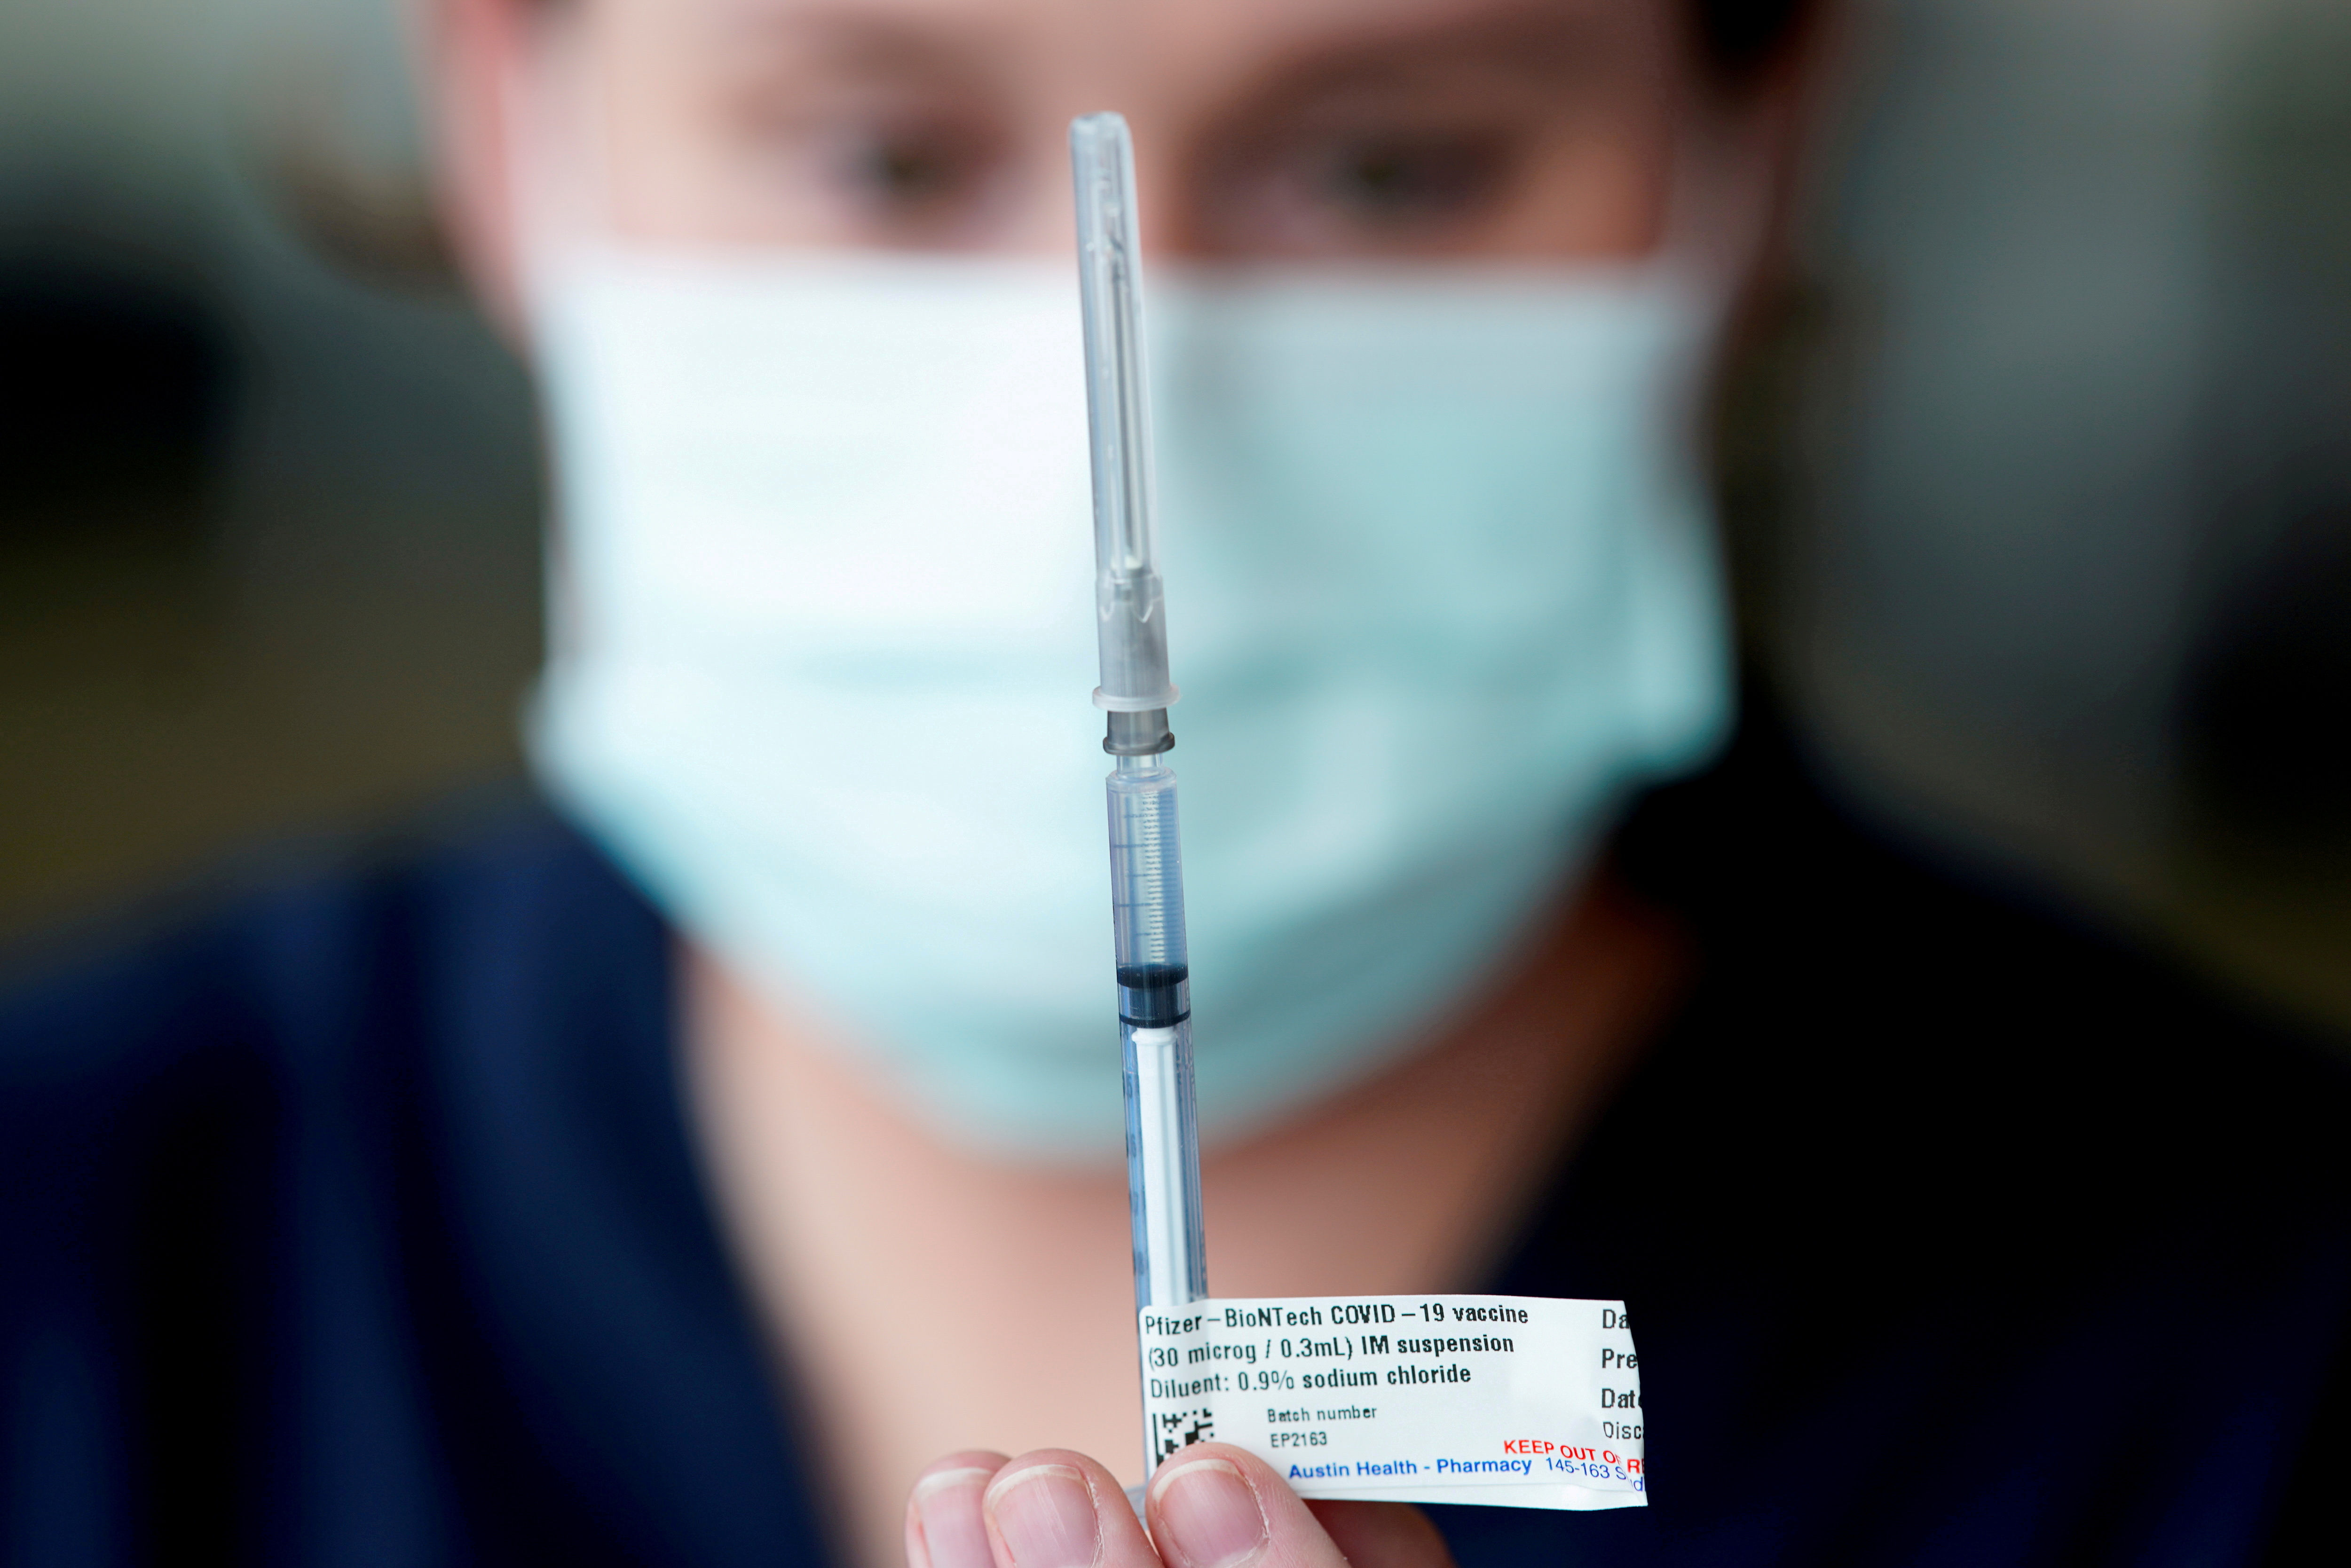 FILE PHOTO: The Pfizer COVID-19 vaccine is prepared by a healthcare worker in Melbourne